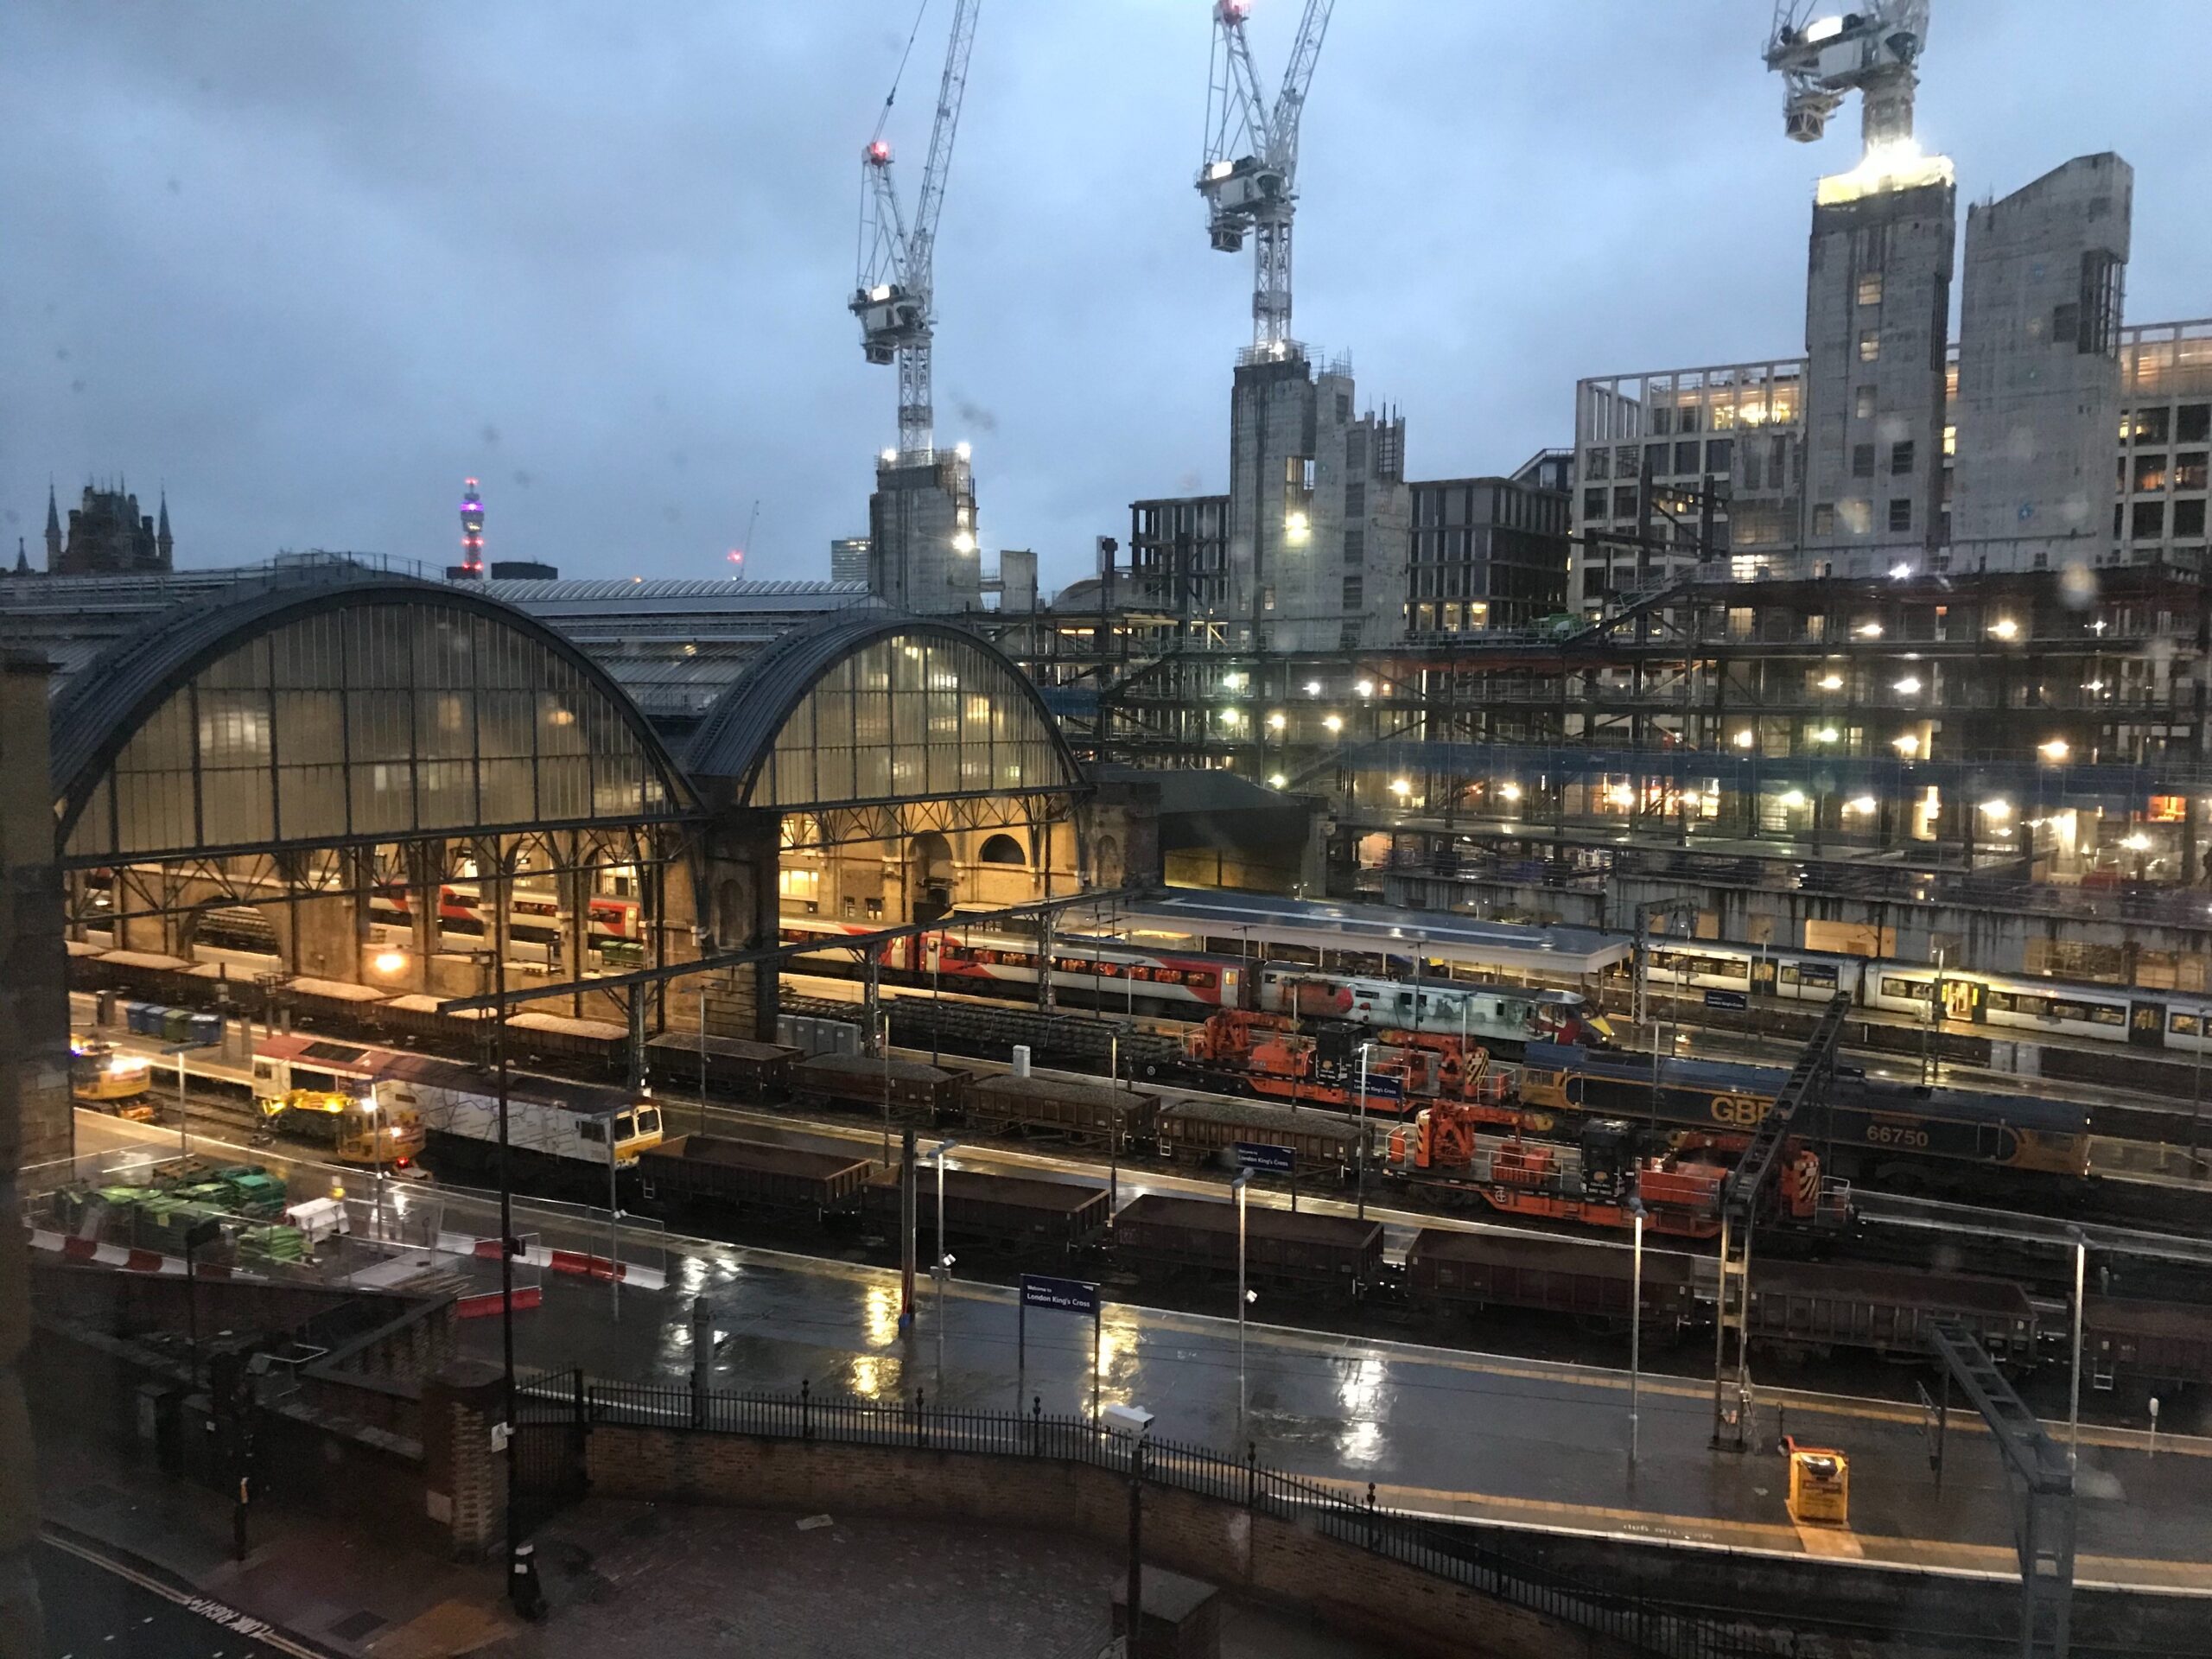 The throat of kings cross train station in the early evening